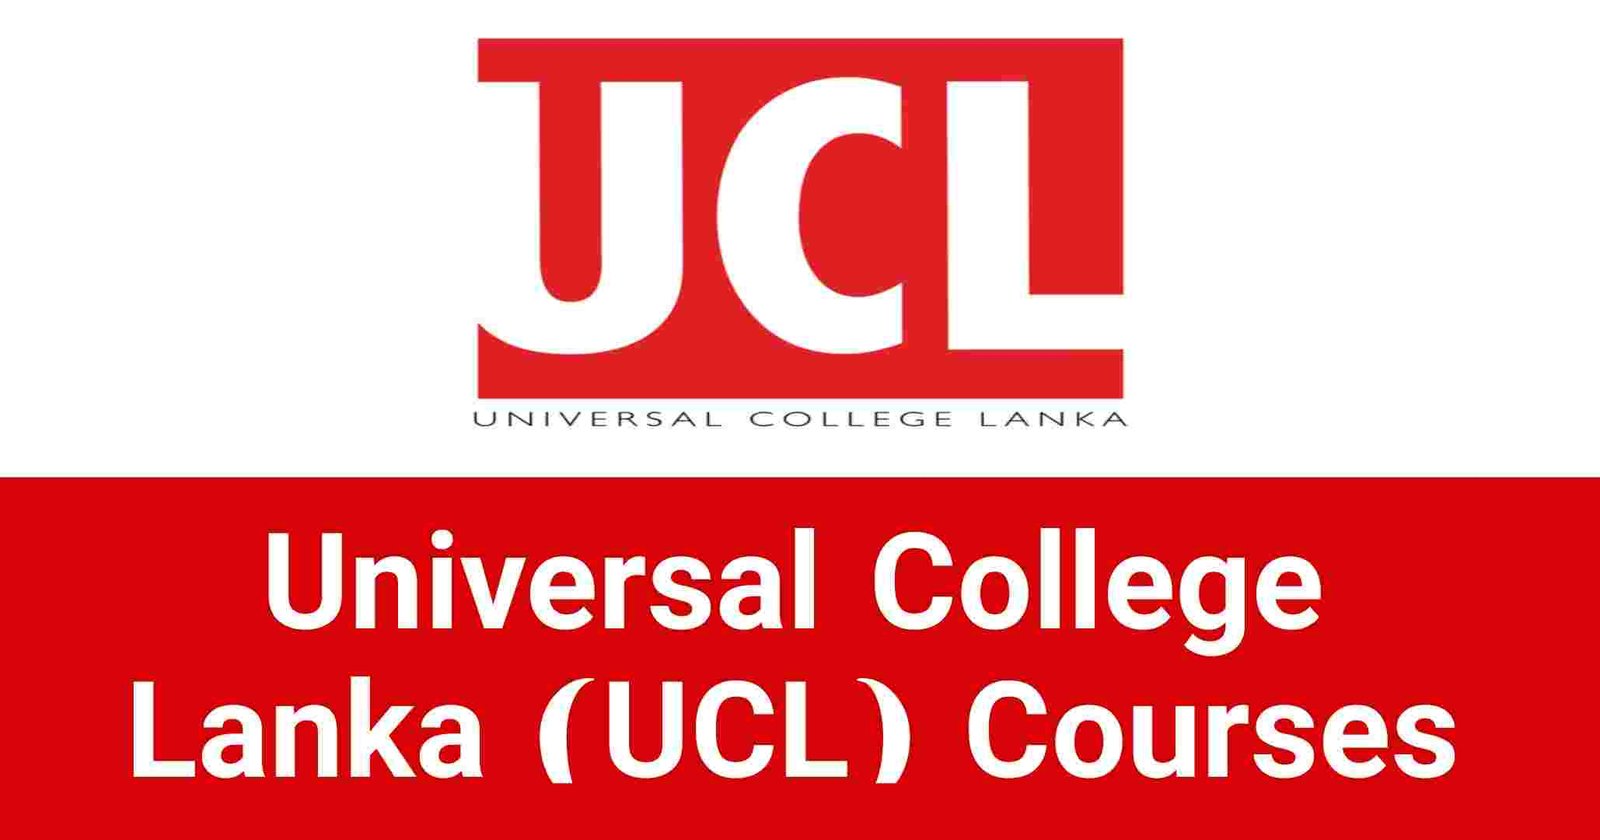 Universal College Lanka (UCL) Courses